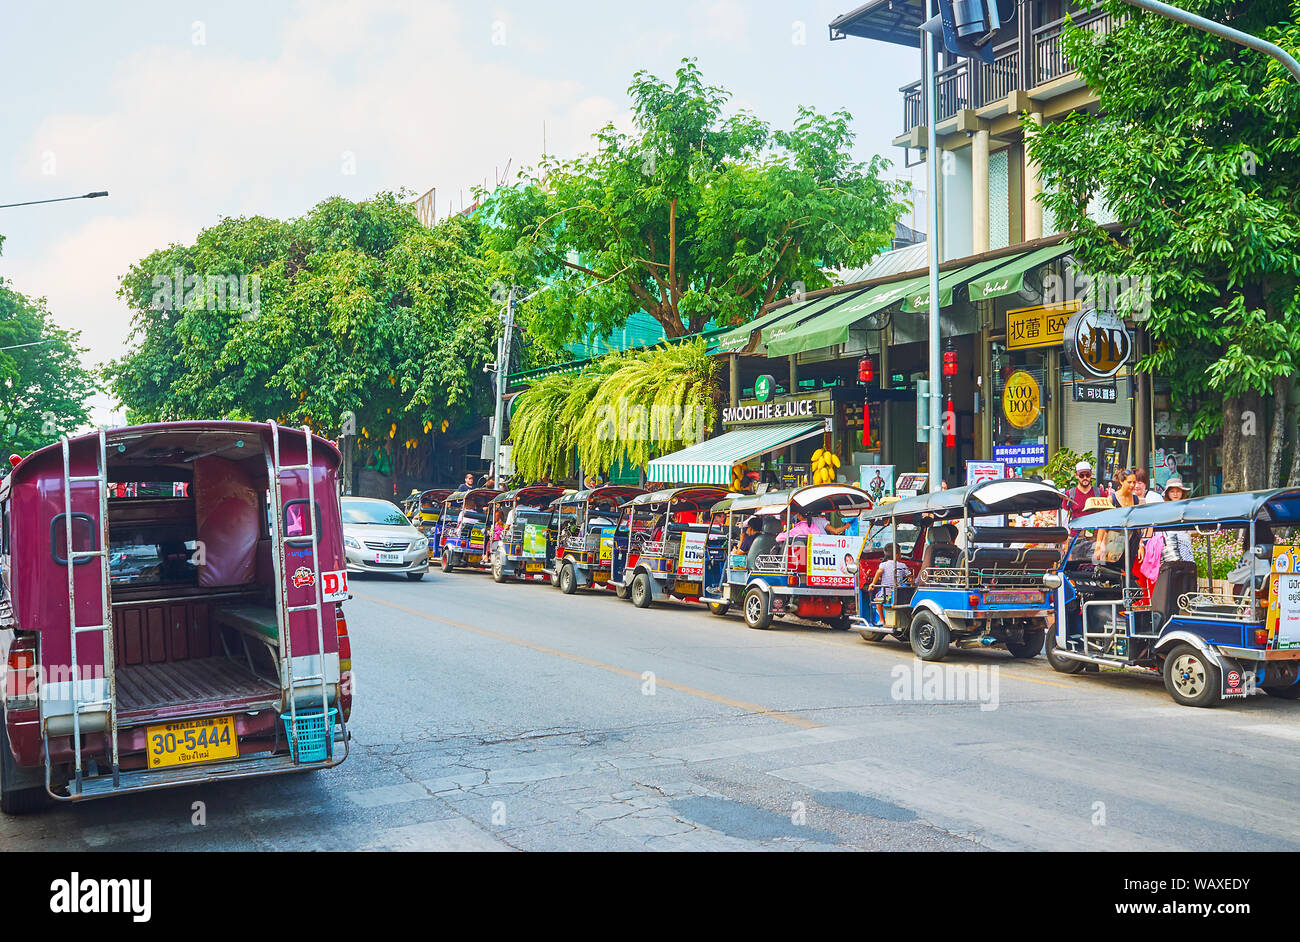 CHIANG MAI, THAILAND - MAY 2, 2019: The tourist street is lined with parked tuk tuks and songtaews - public red pickups (trucks), serving as shared ta Stock Photo